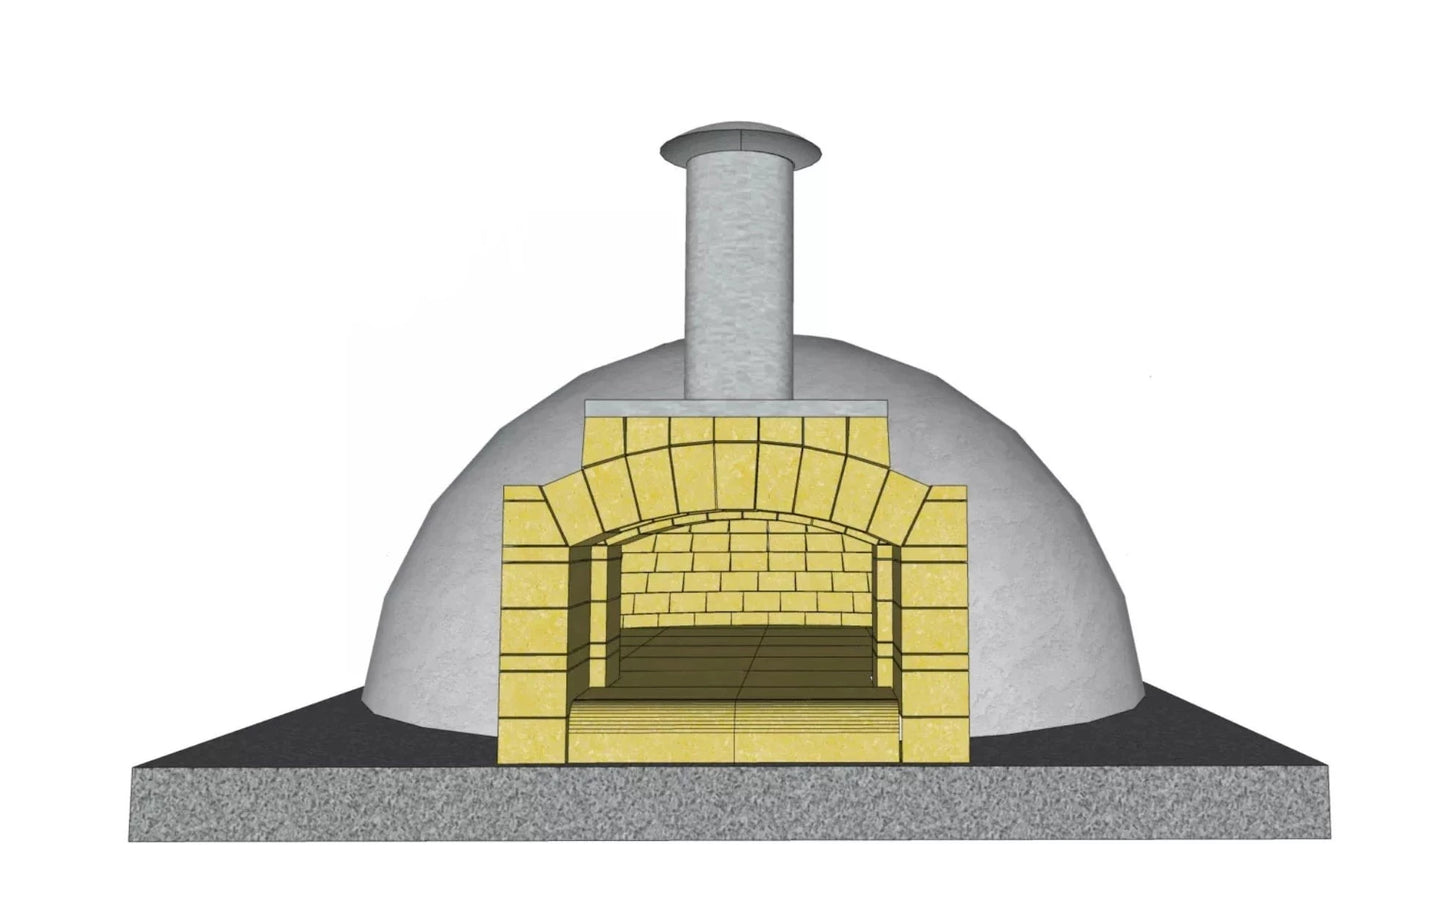 1500 PRECUT Brick dome oven kit - The Woodfired Co.